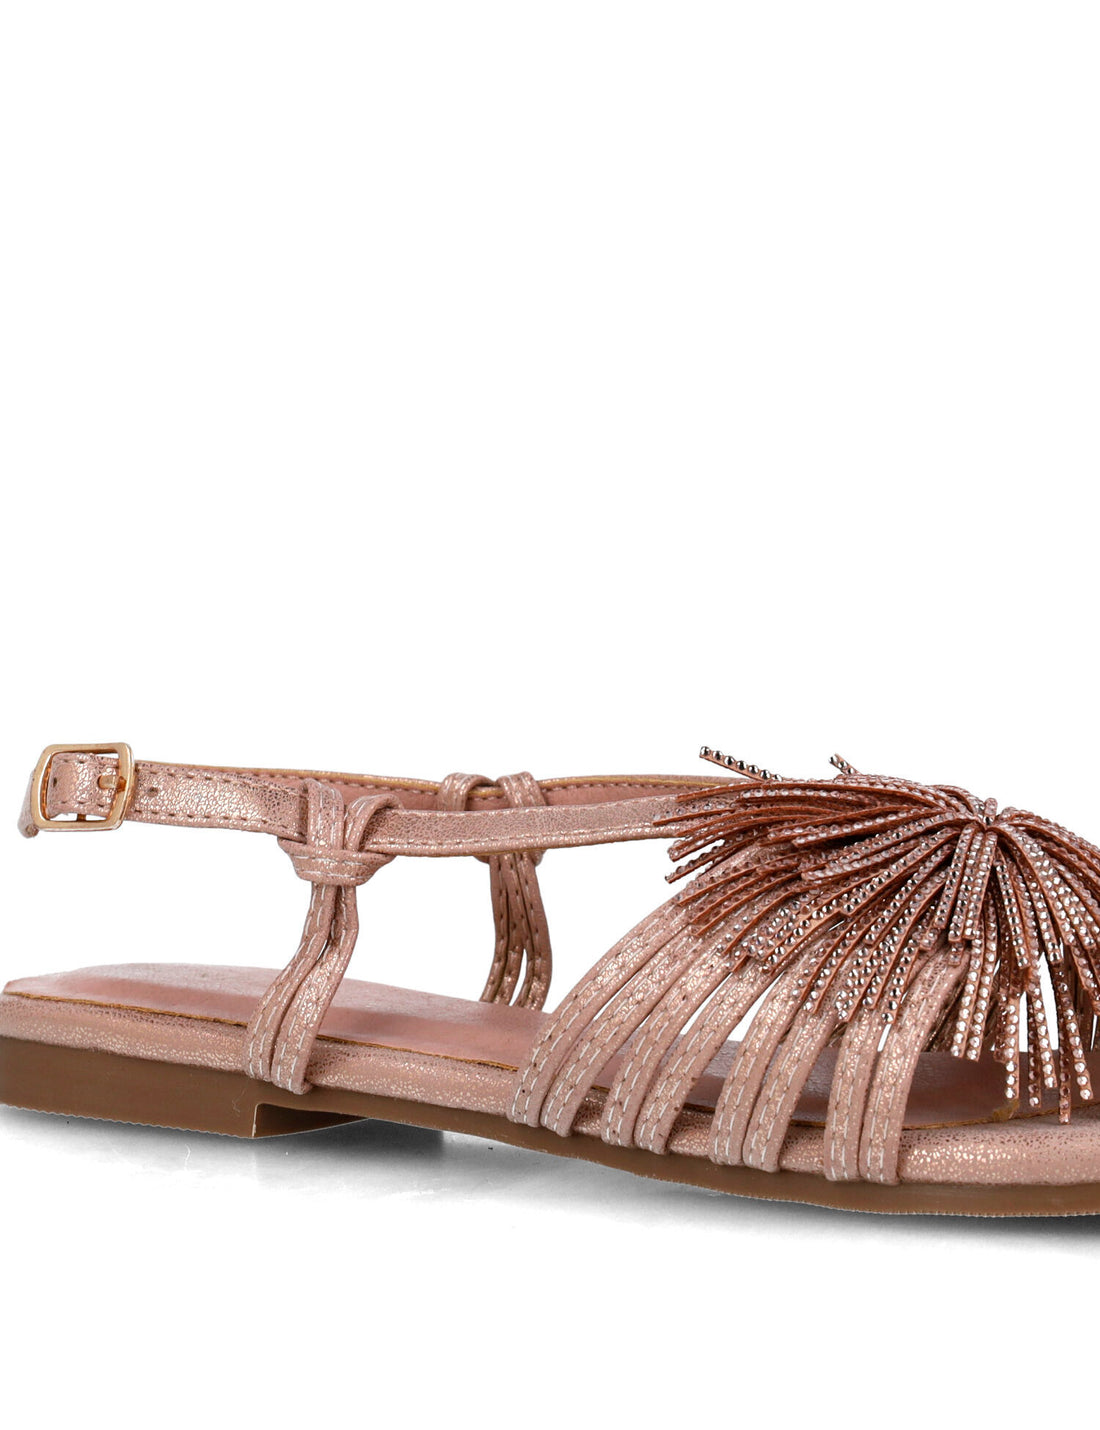 Brown Flat Sandals With Fringe Piece_25414_97_02